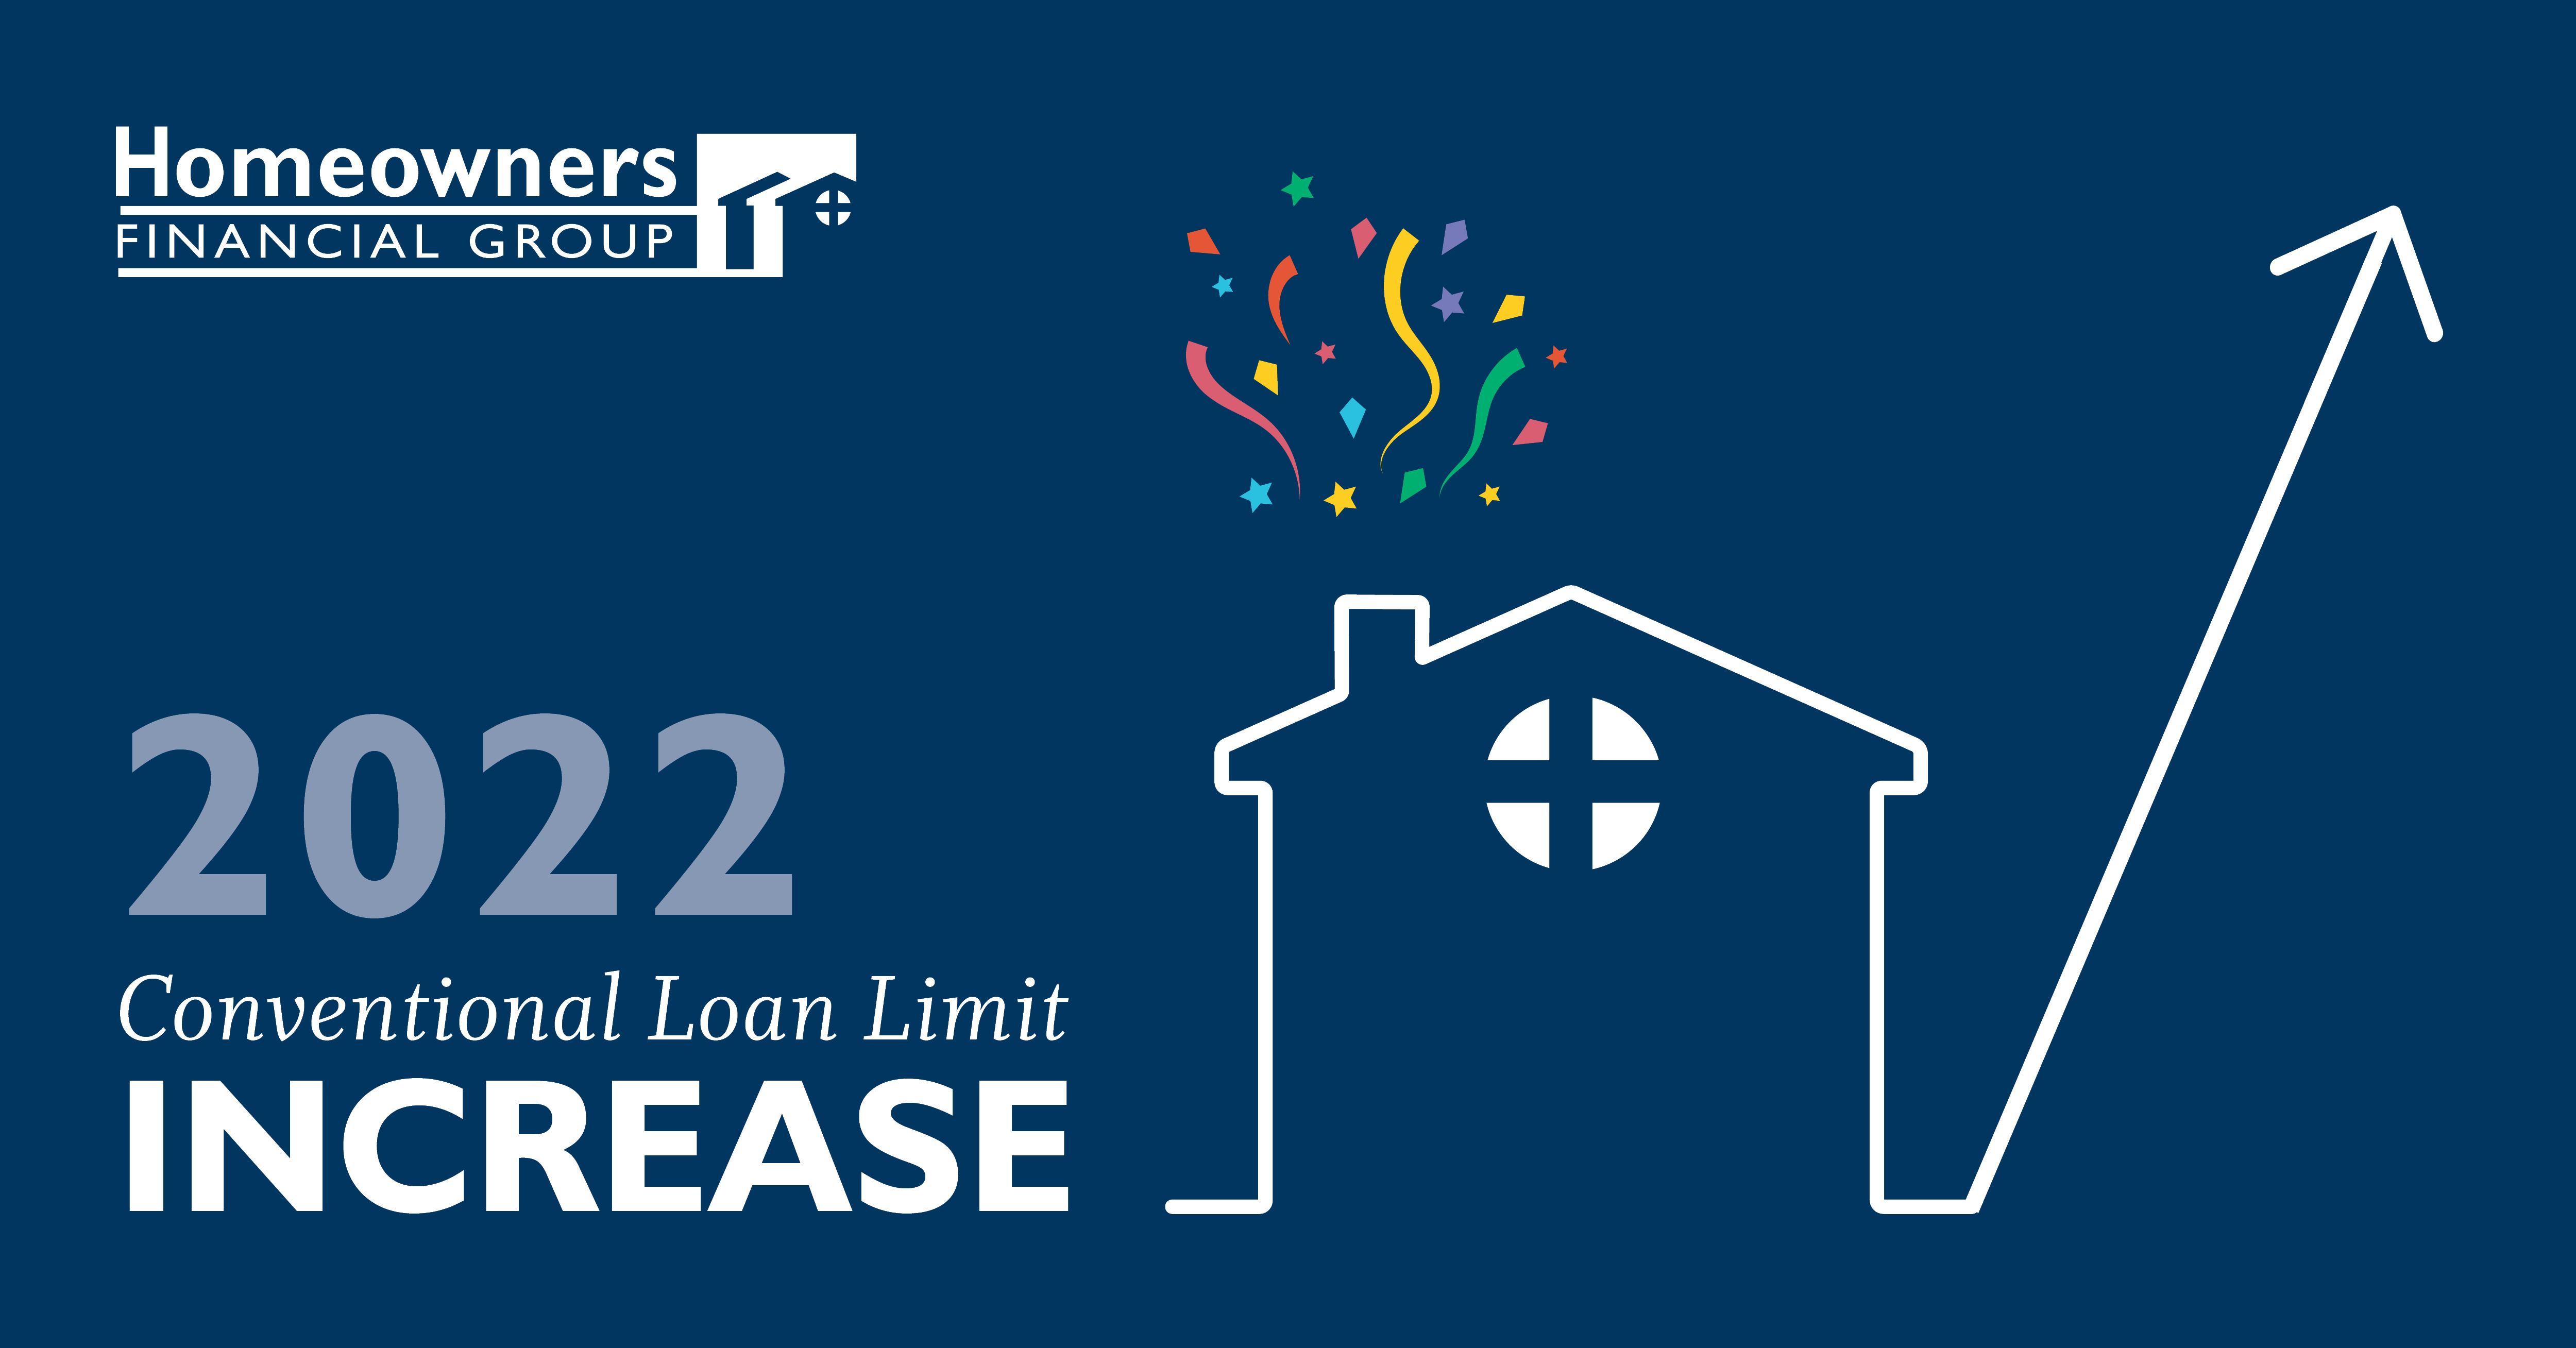 Conforming Loan Limit Increase for 2022